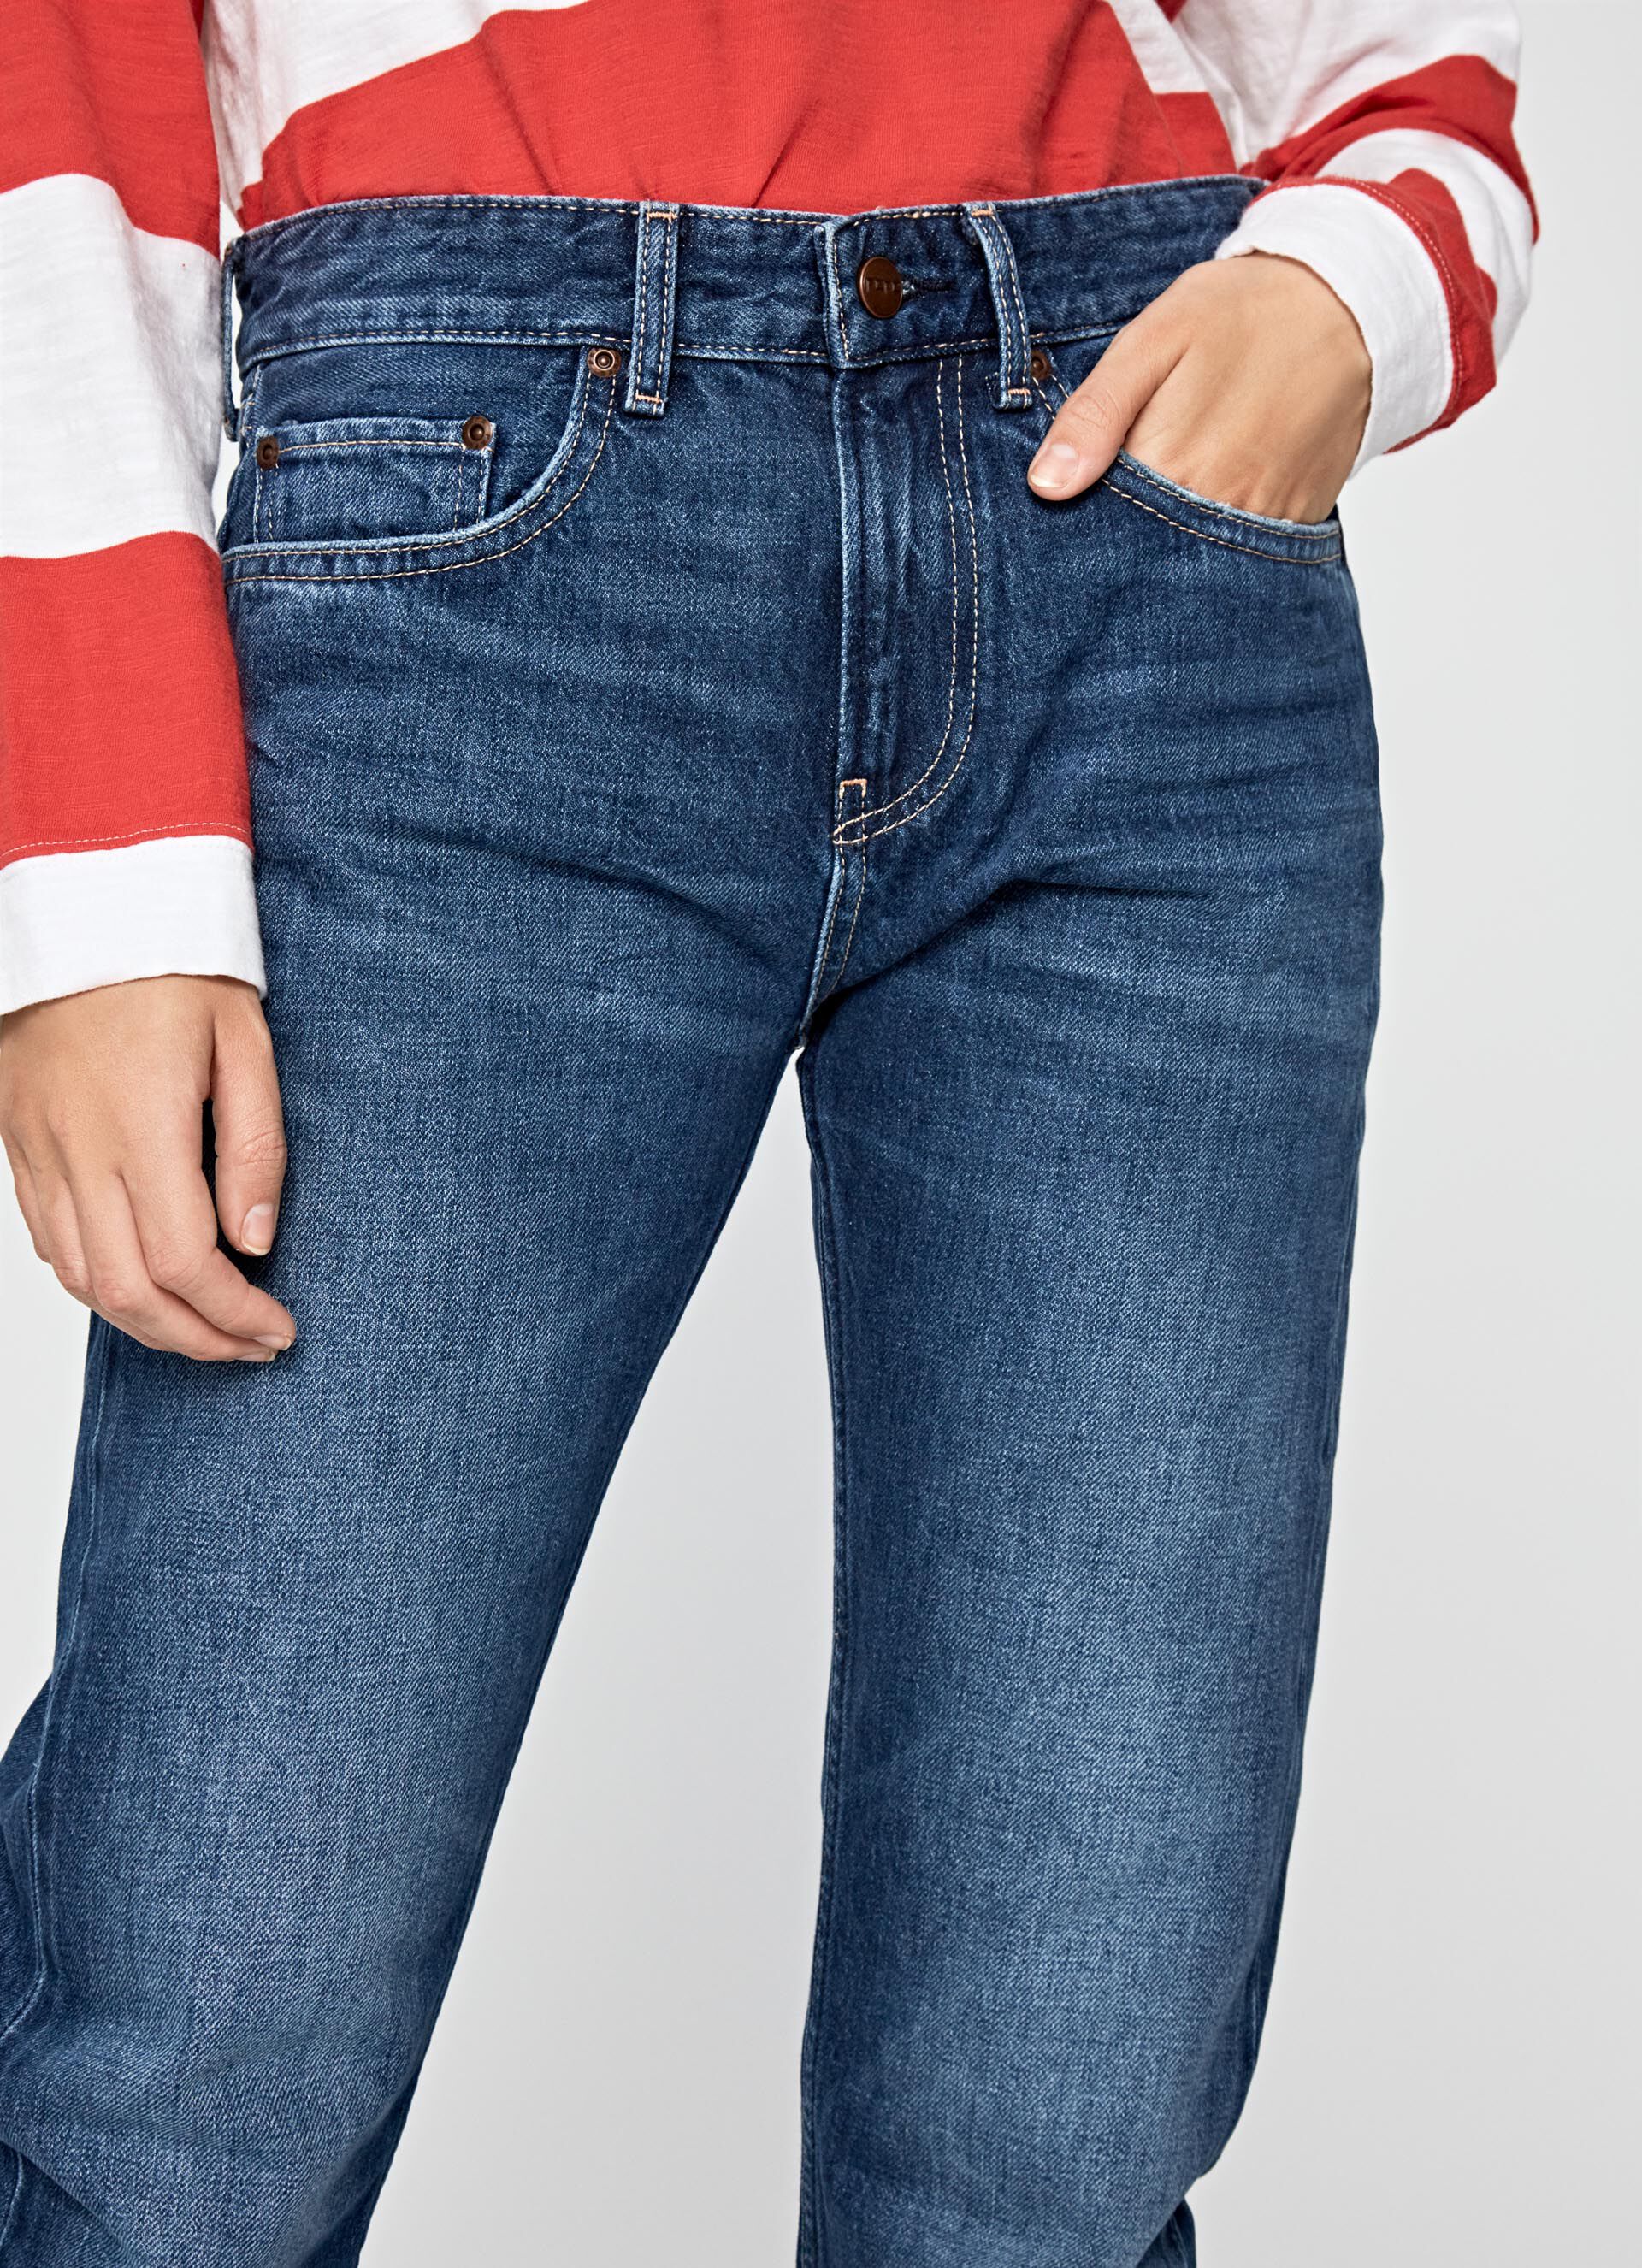 Pepe Jeans Mable Vaqueros Straight para Mujer